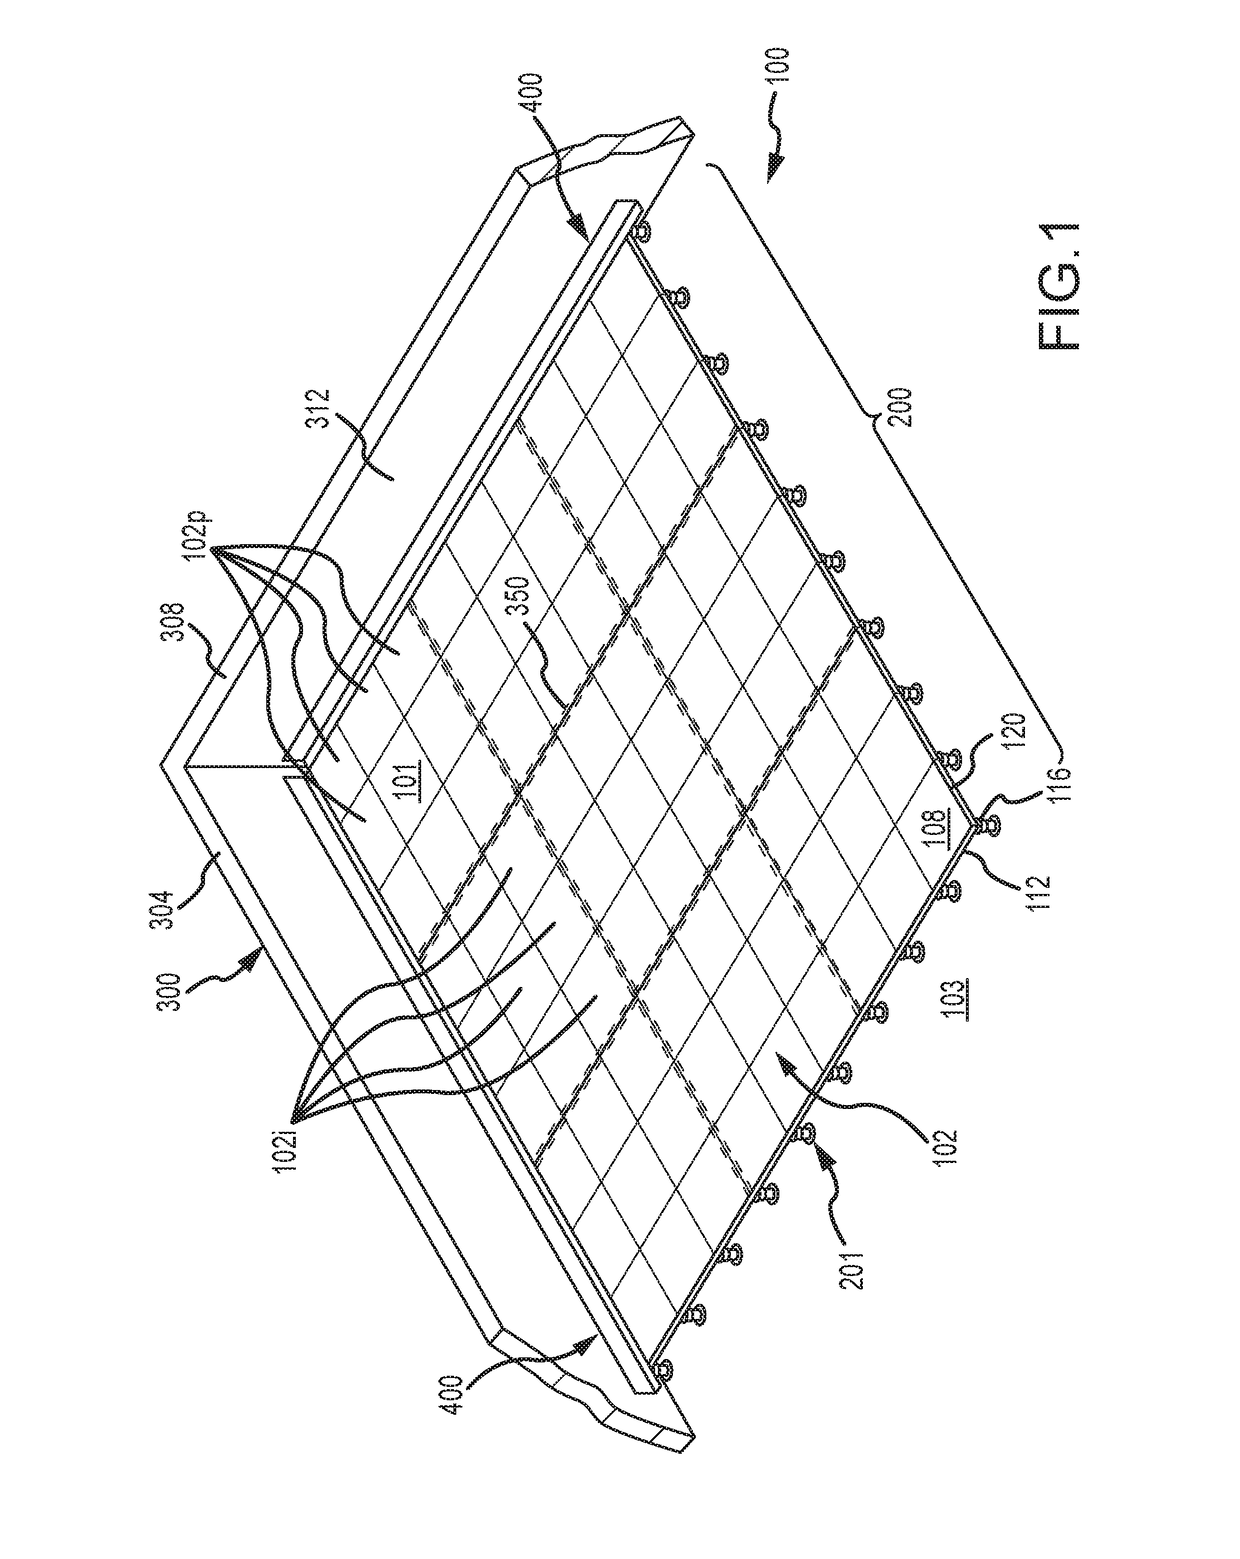 Peripheral stabilizing system for elevated flooring surface